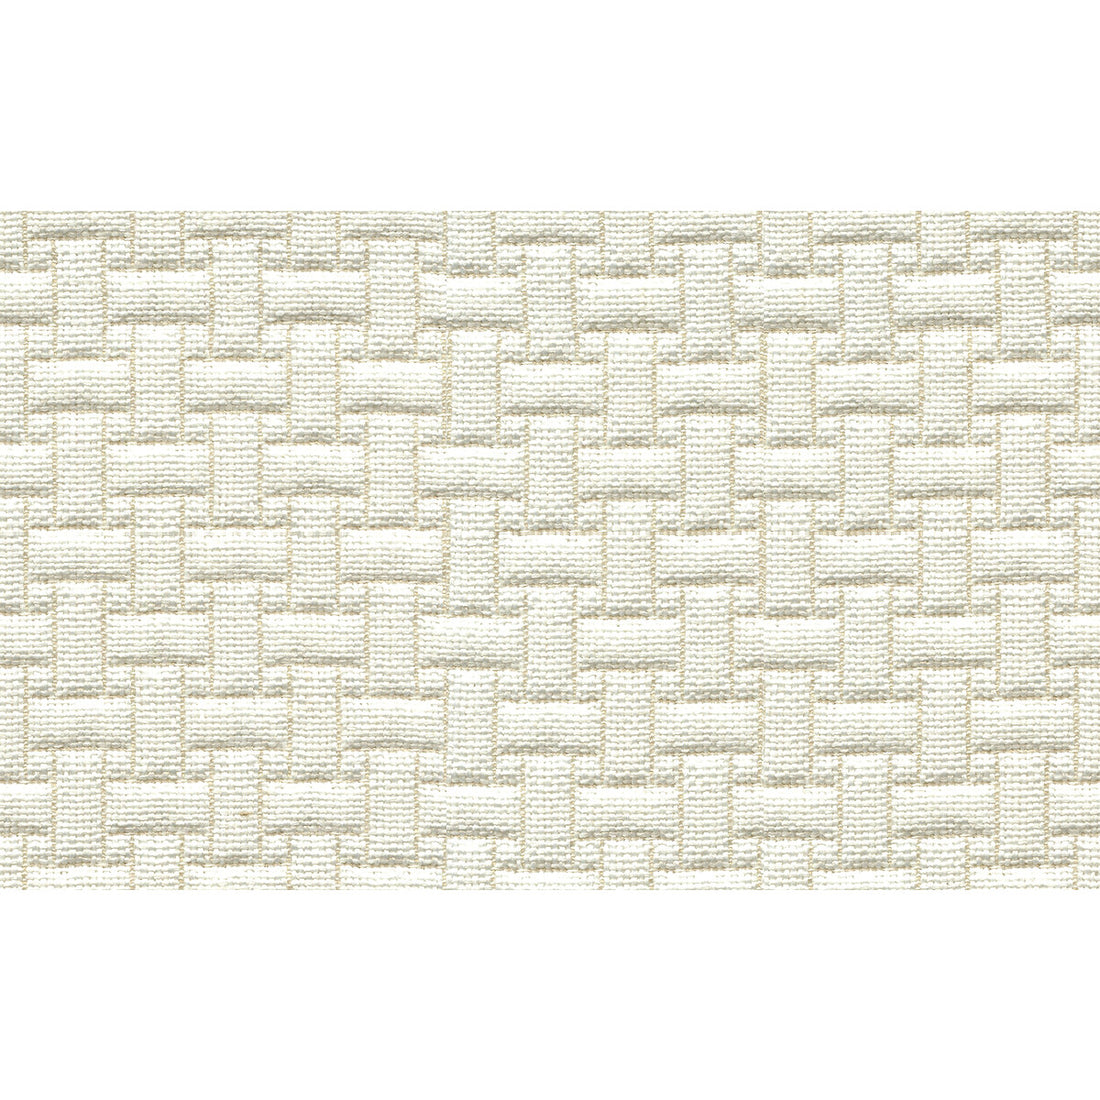 Magaluf fabric in ivory color - pattern 35076.1.0 - by Kravet Design in the Alexa Hampton Mallorca collection